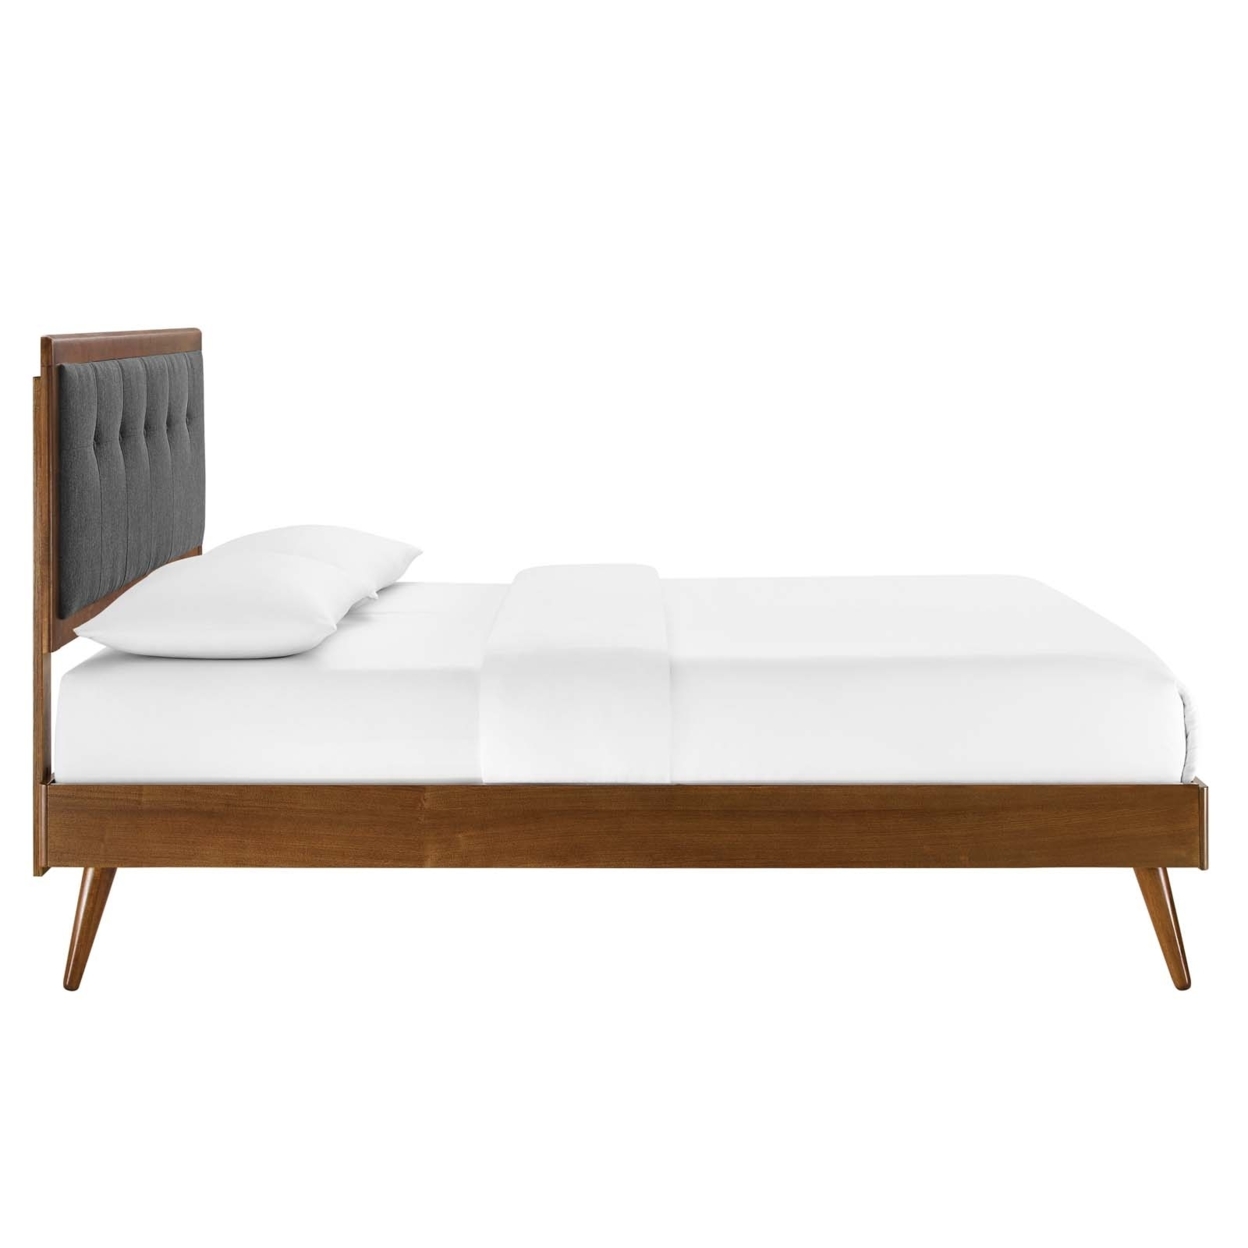 Willow Full Wood Platform Bed With Splayed Legs, Walnut Charcoal